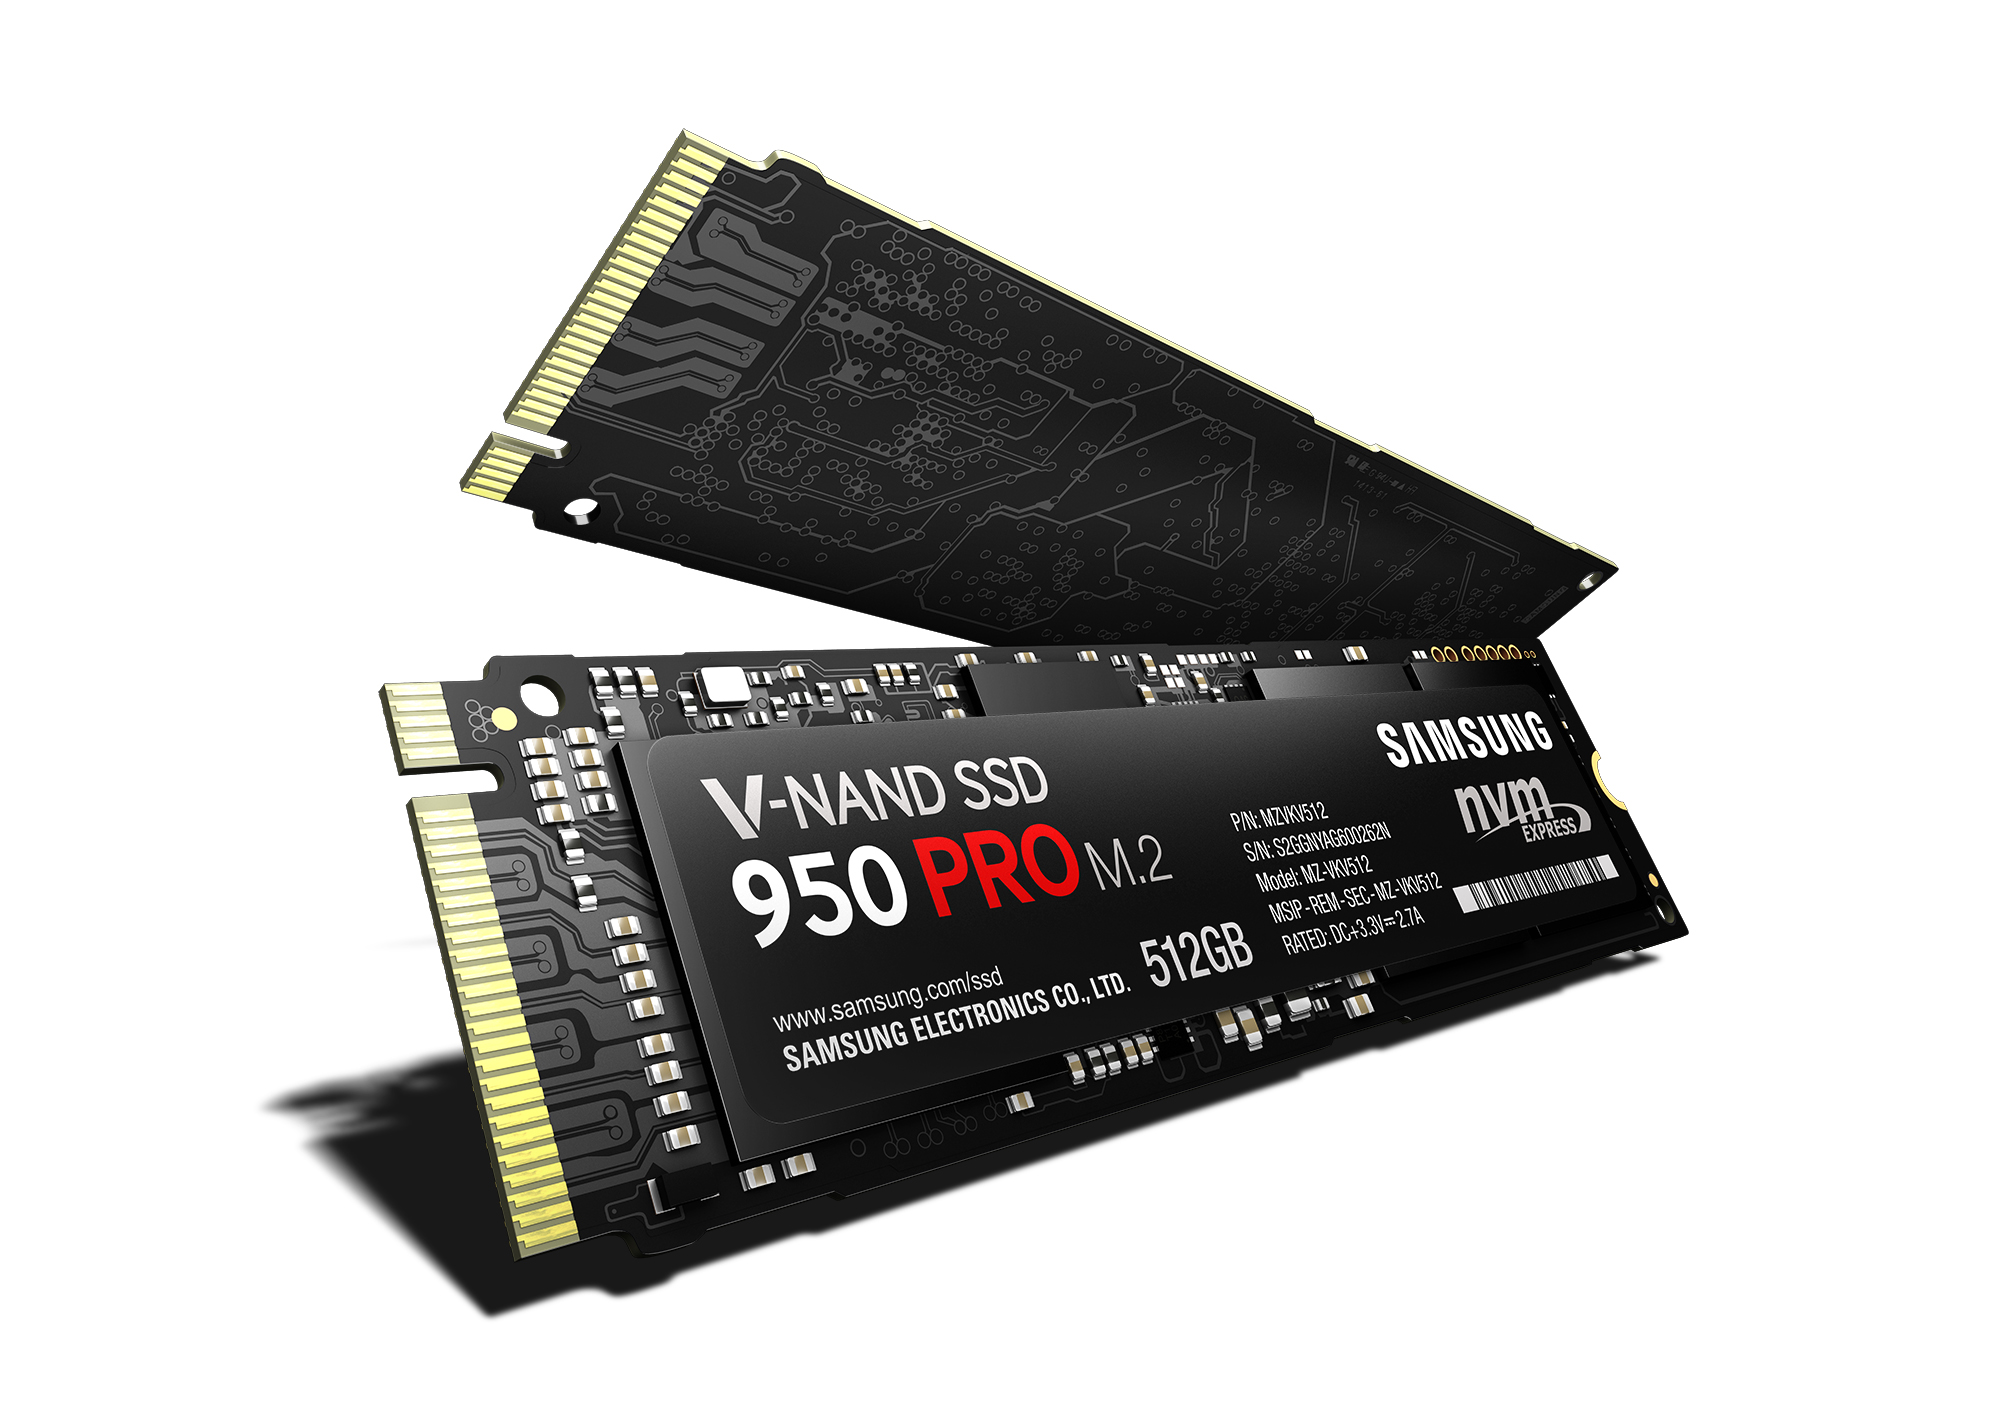 Samsung Announces 950 Pro SSD, Their First Consumer V-NAND NVMe SSD